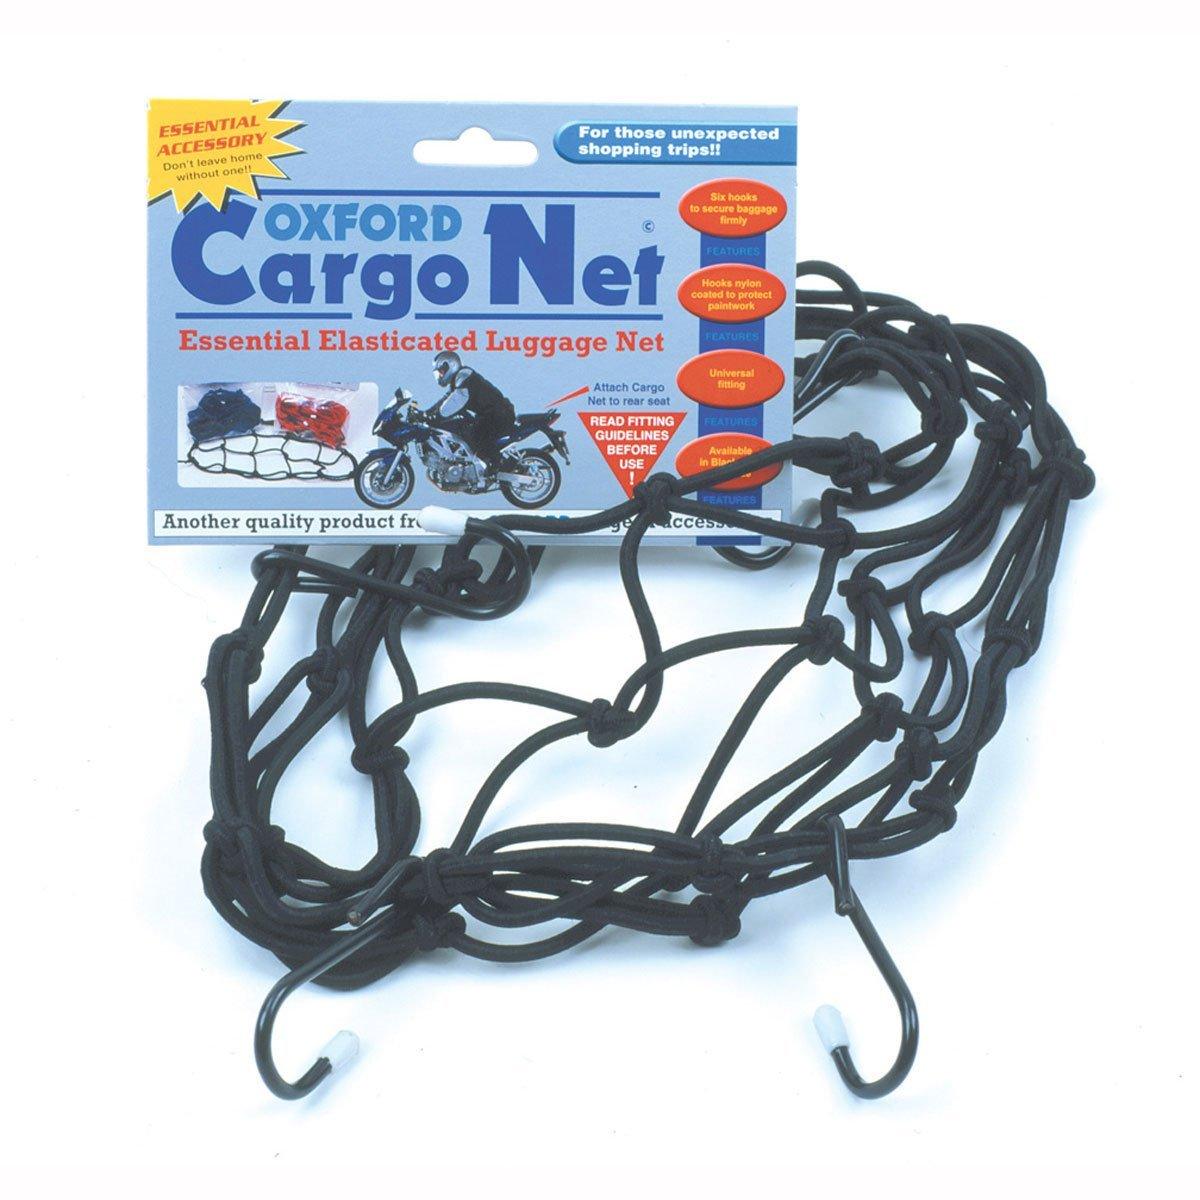 Oxford Cargo Net - 12 x 12 inches